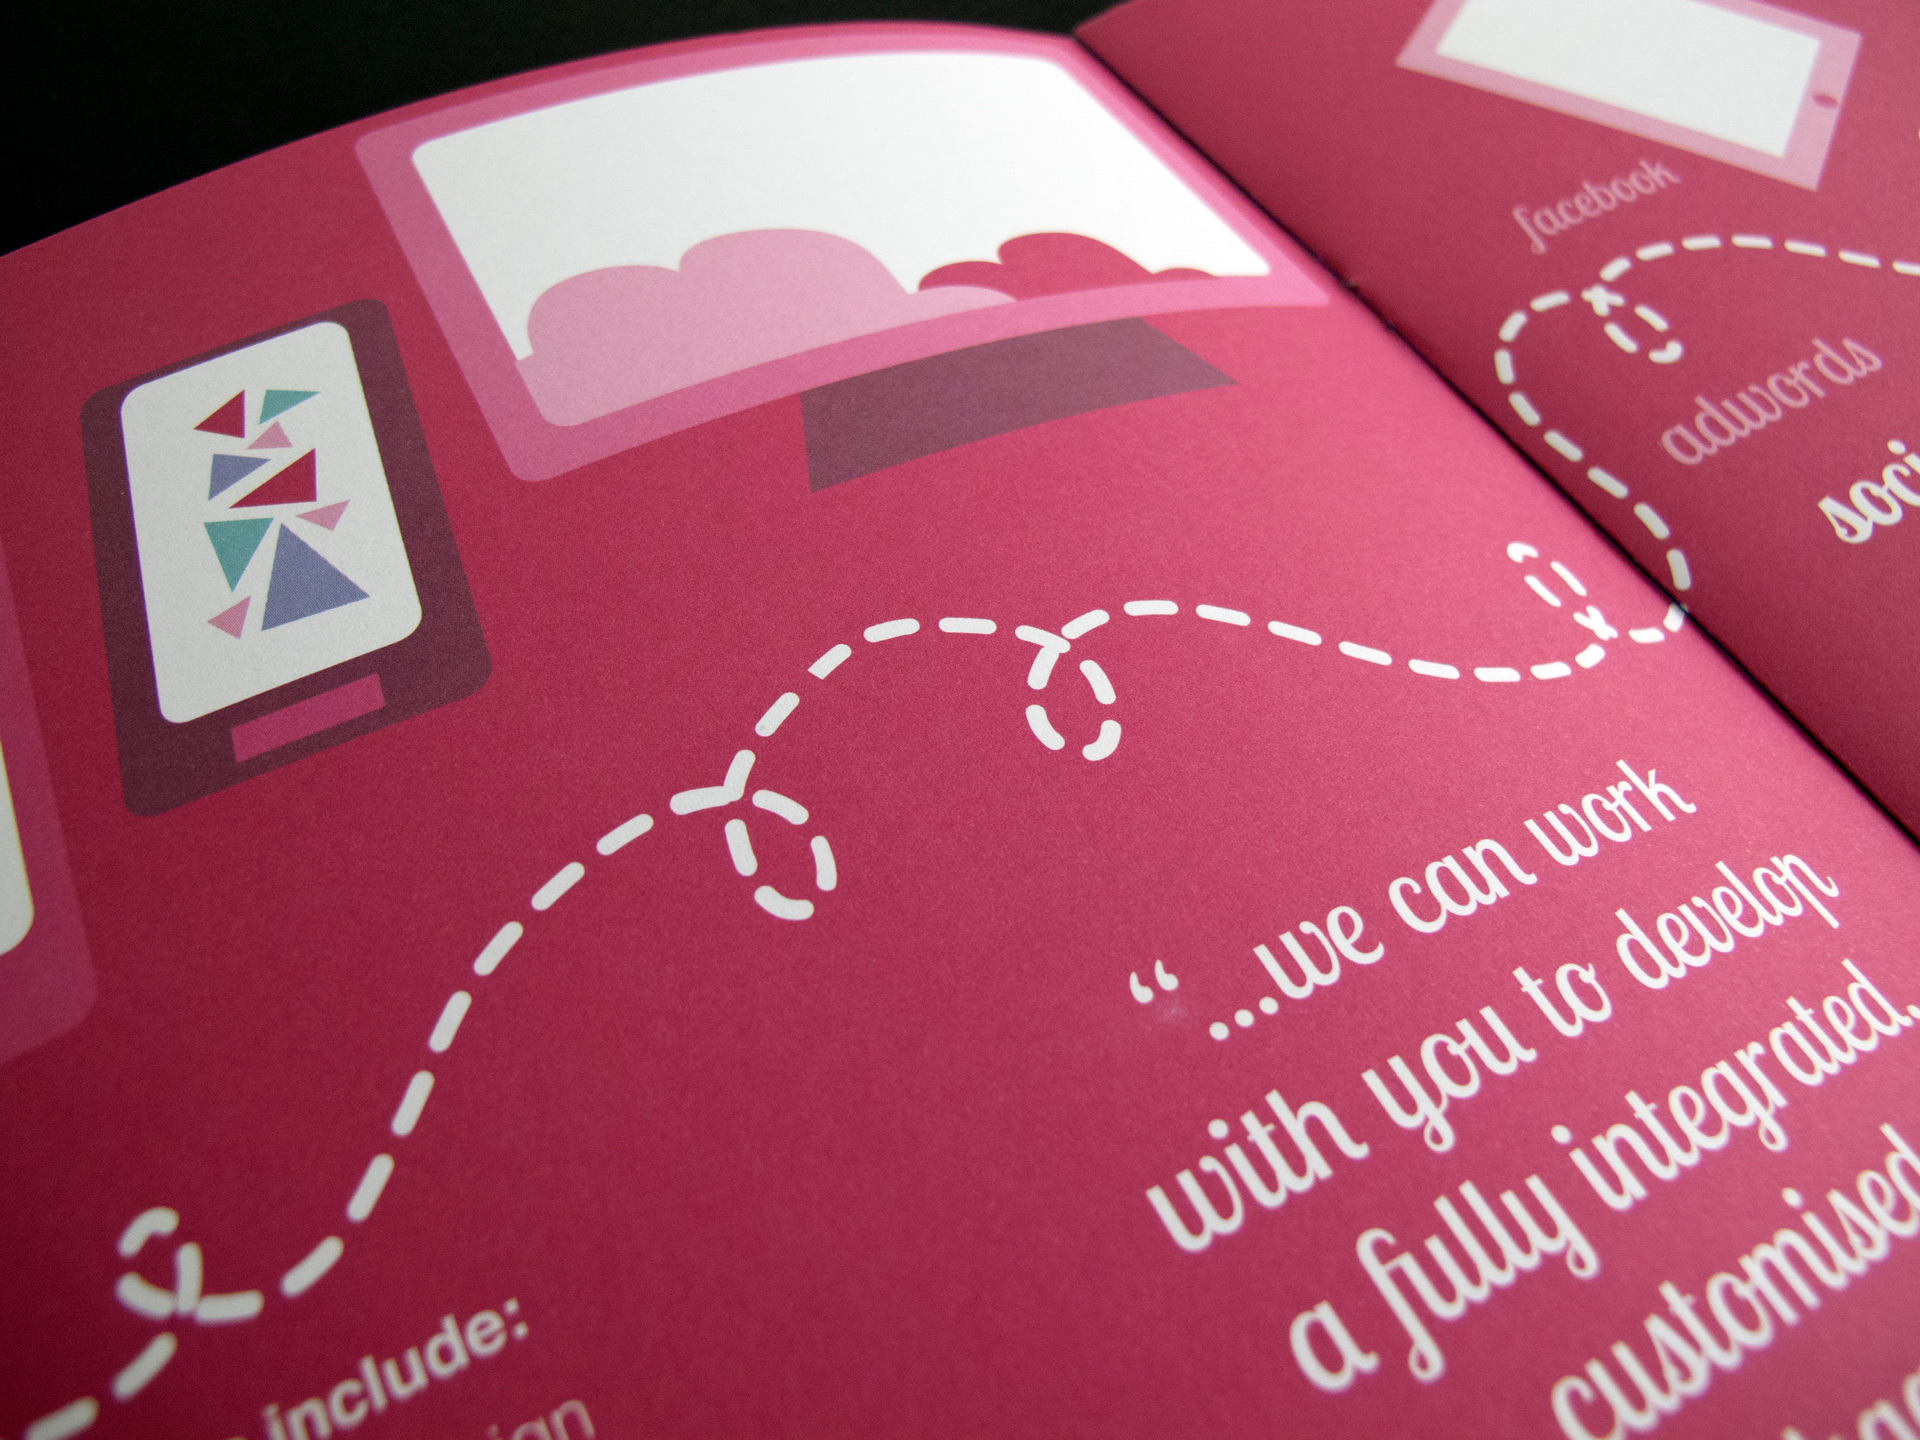 A close-up, angled photo of the centre of the digital and social media brochure page spread. The pages are a bold pink colour with white text. The vector illustration depicts mobile, desktop, and tablet devices. There is a white dotted swirly line across the page to represent connectivity.